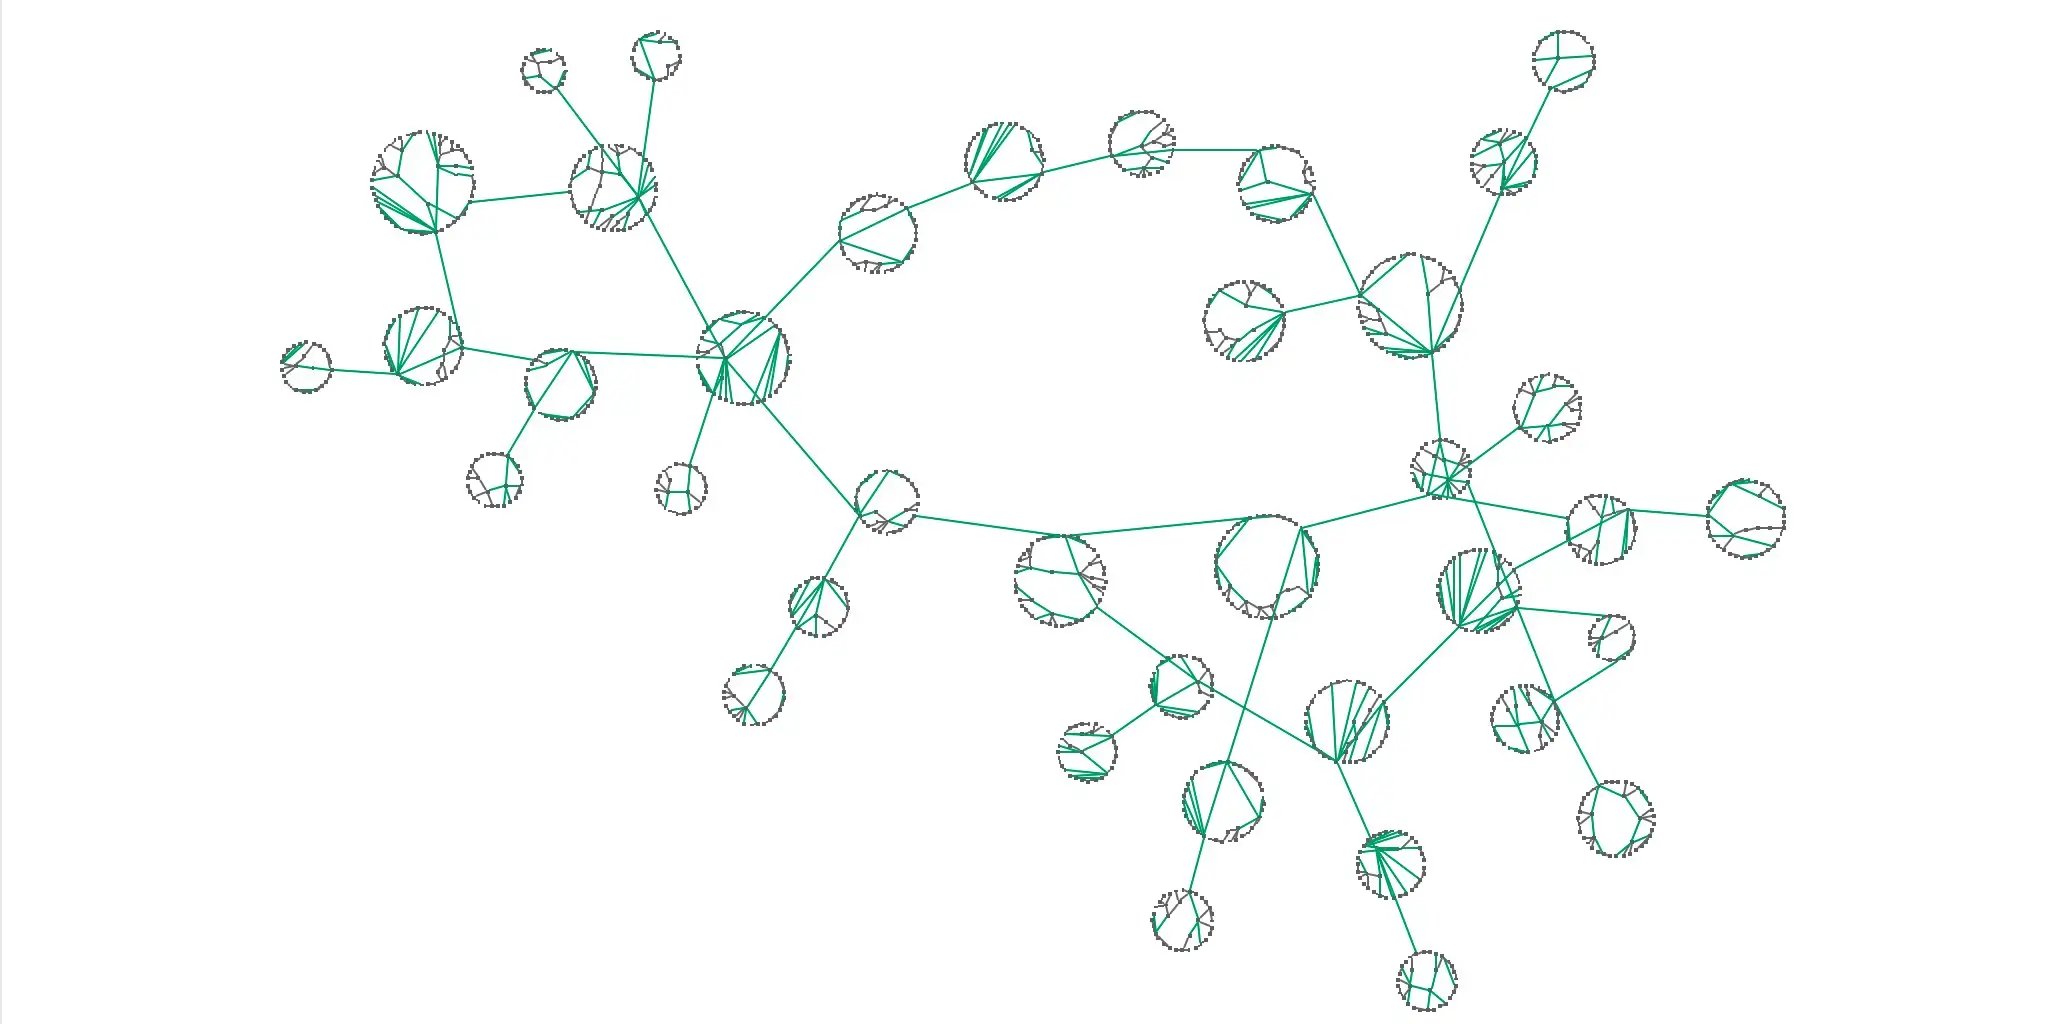 A circular graph visualization of a large network.